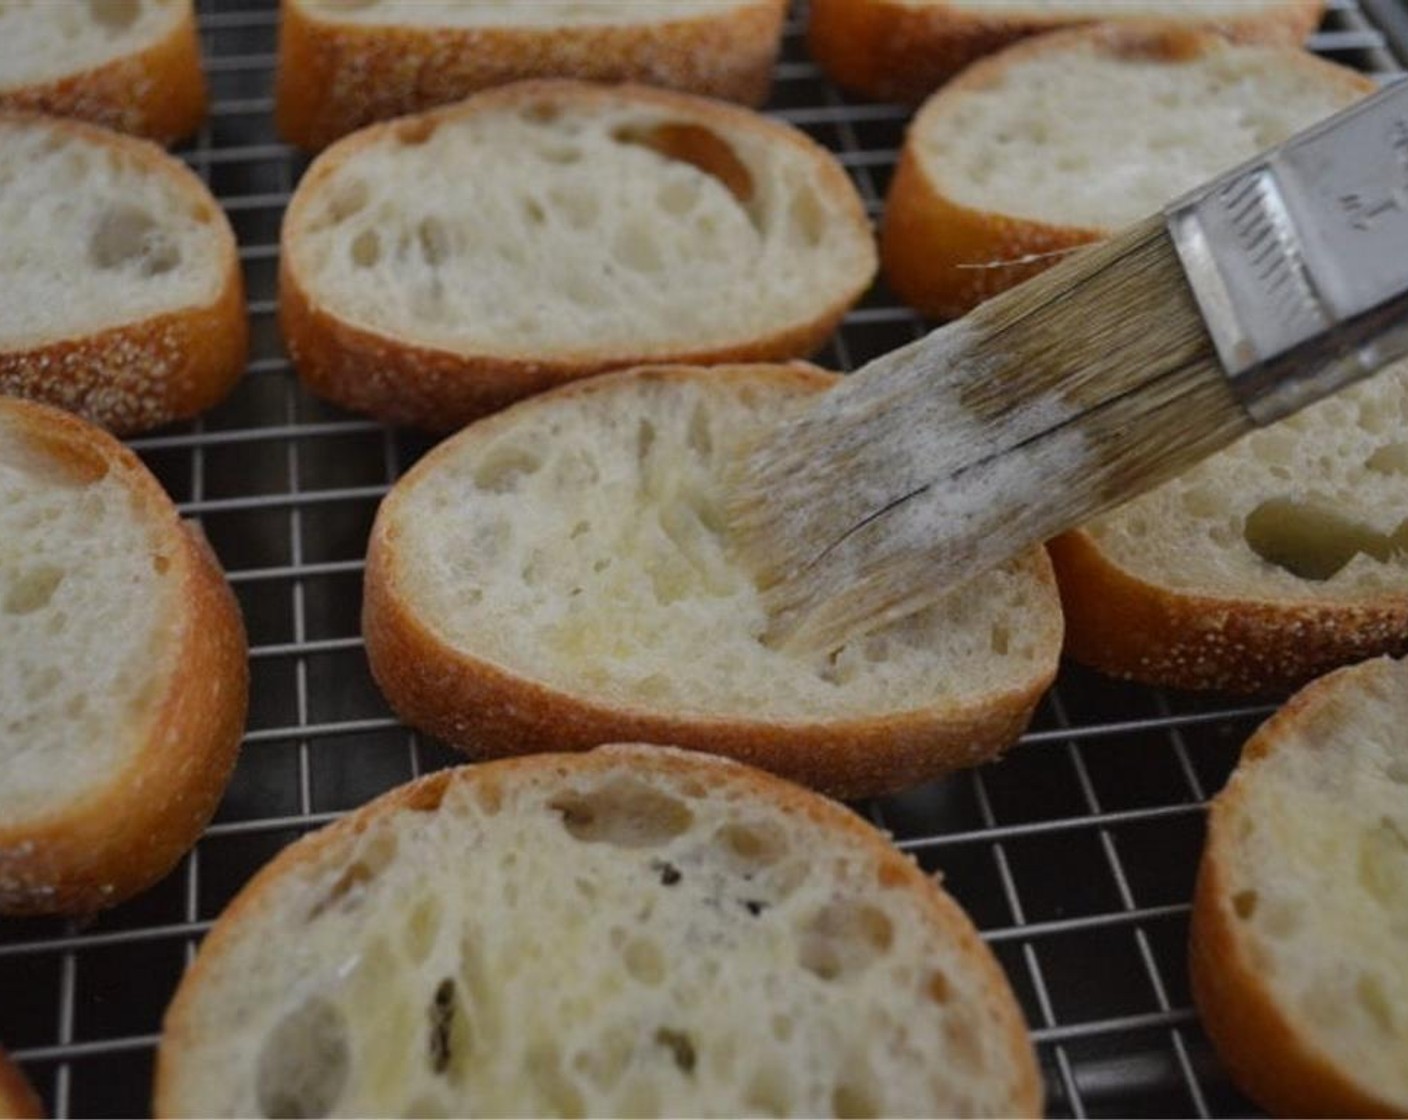 step 3 Transfer the slices of bread to a baking sheet fitted with a rack and brush each one generously with the Butter (1/4 cup).